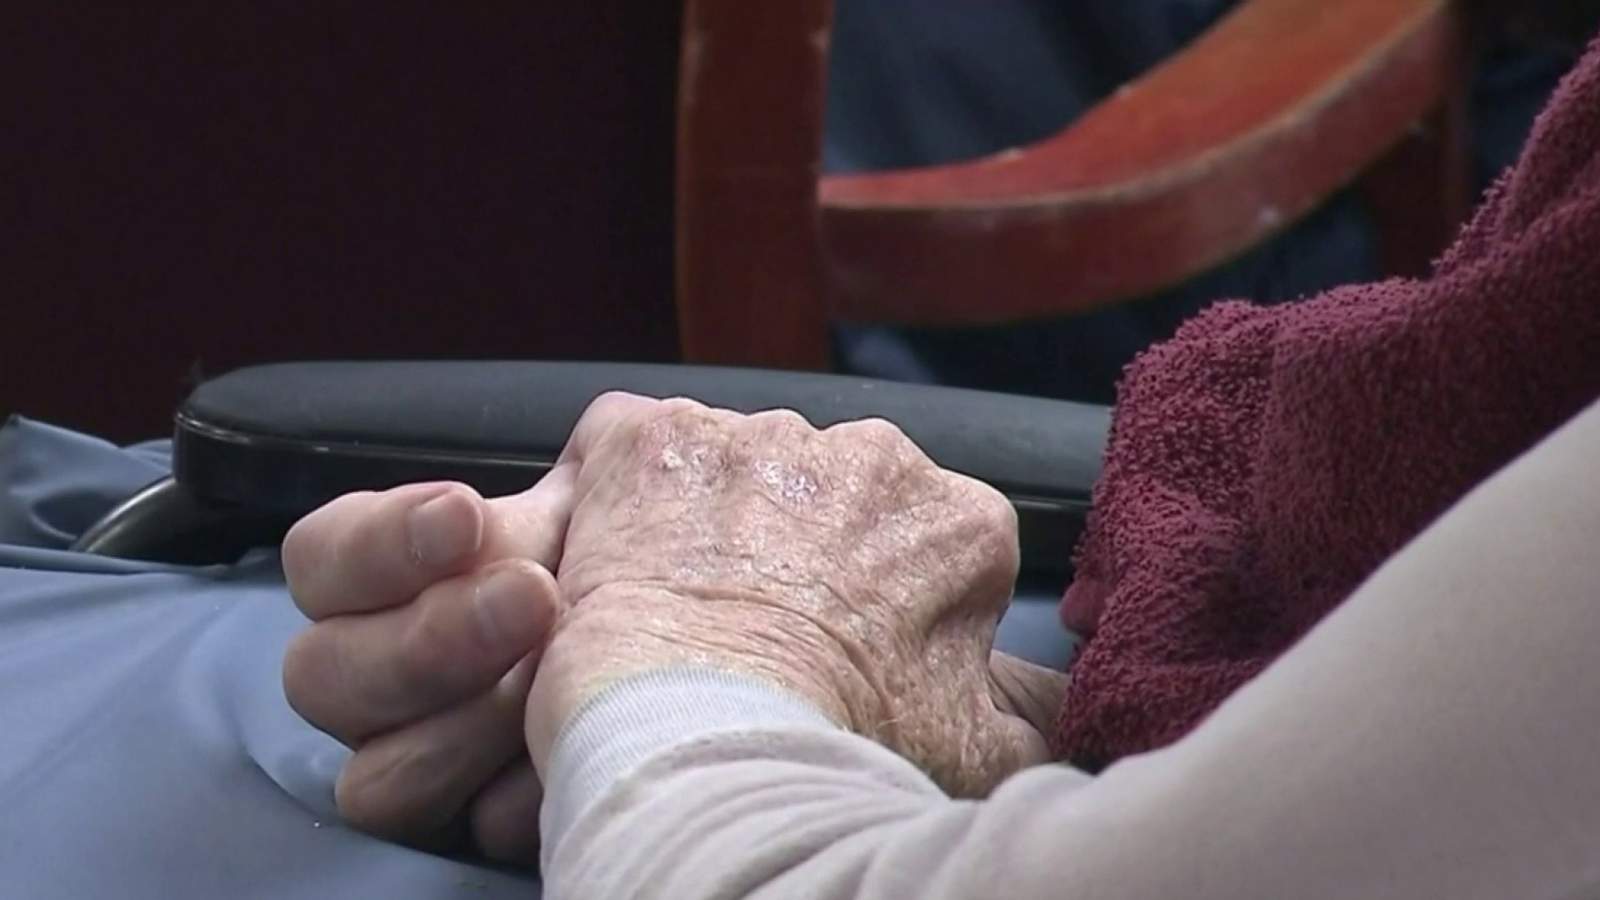 Michigan lawmakers hold hearing, seek answers about nursing home deaths amid pandemic